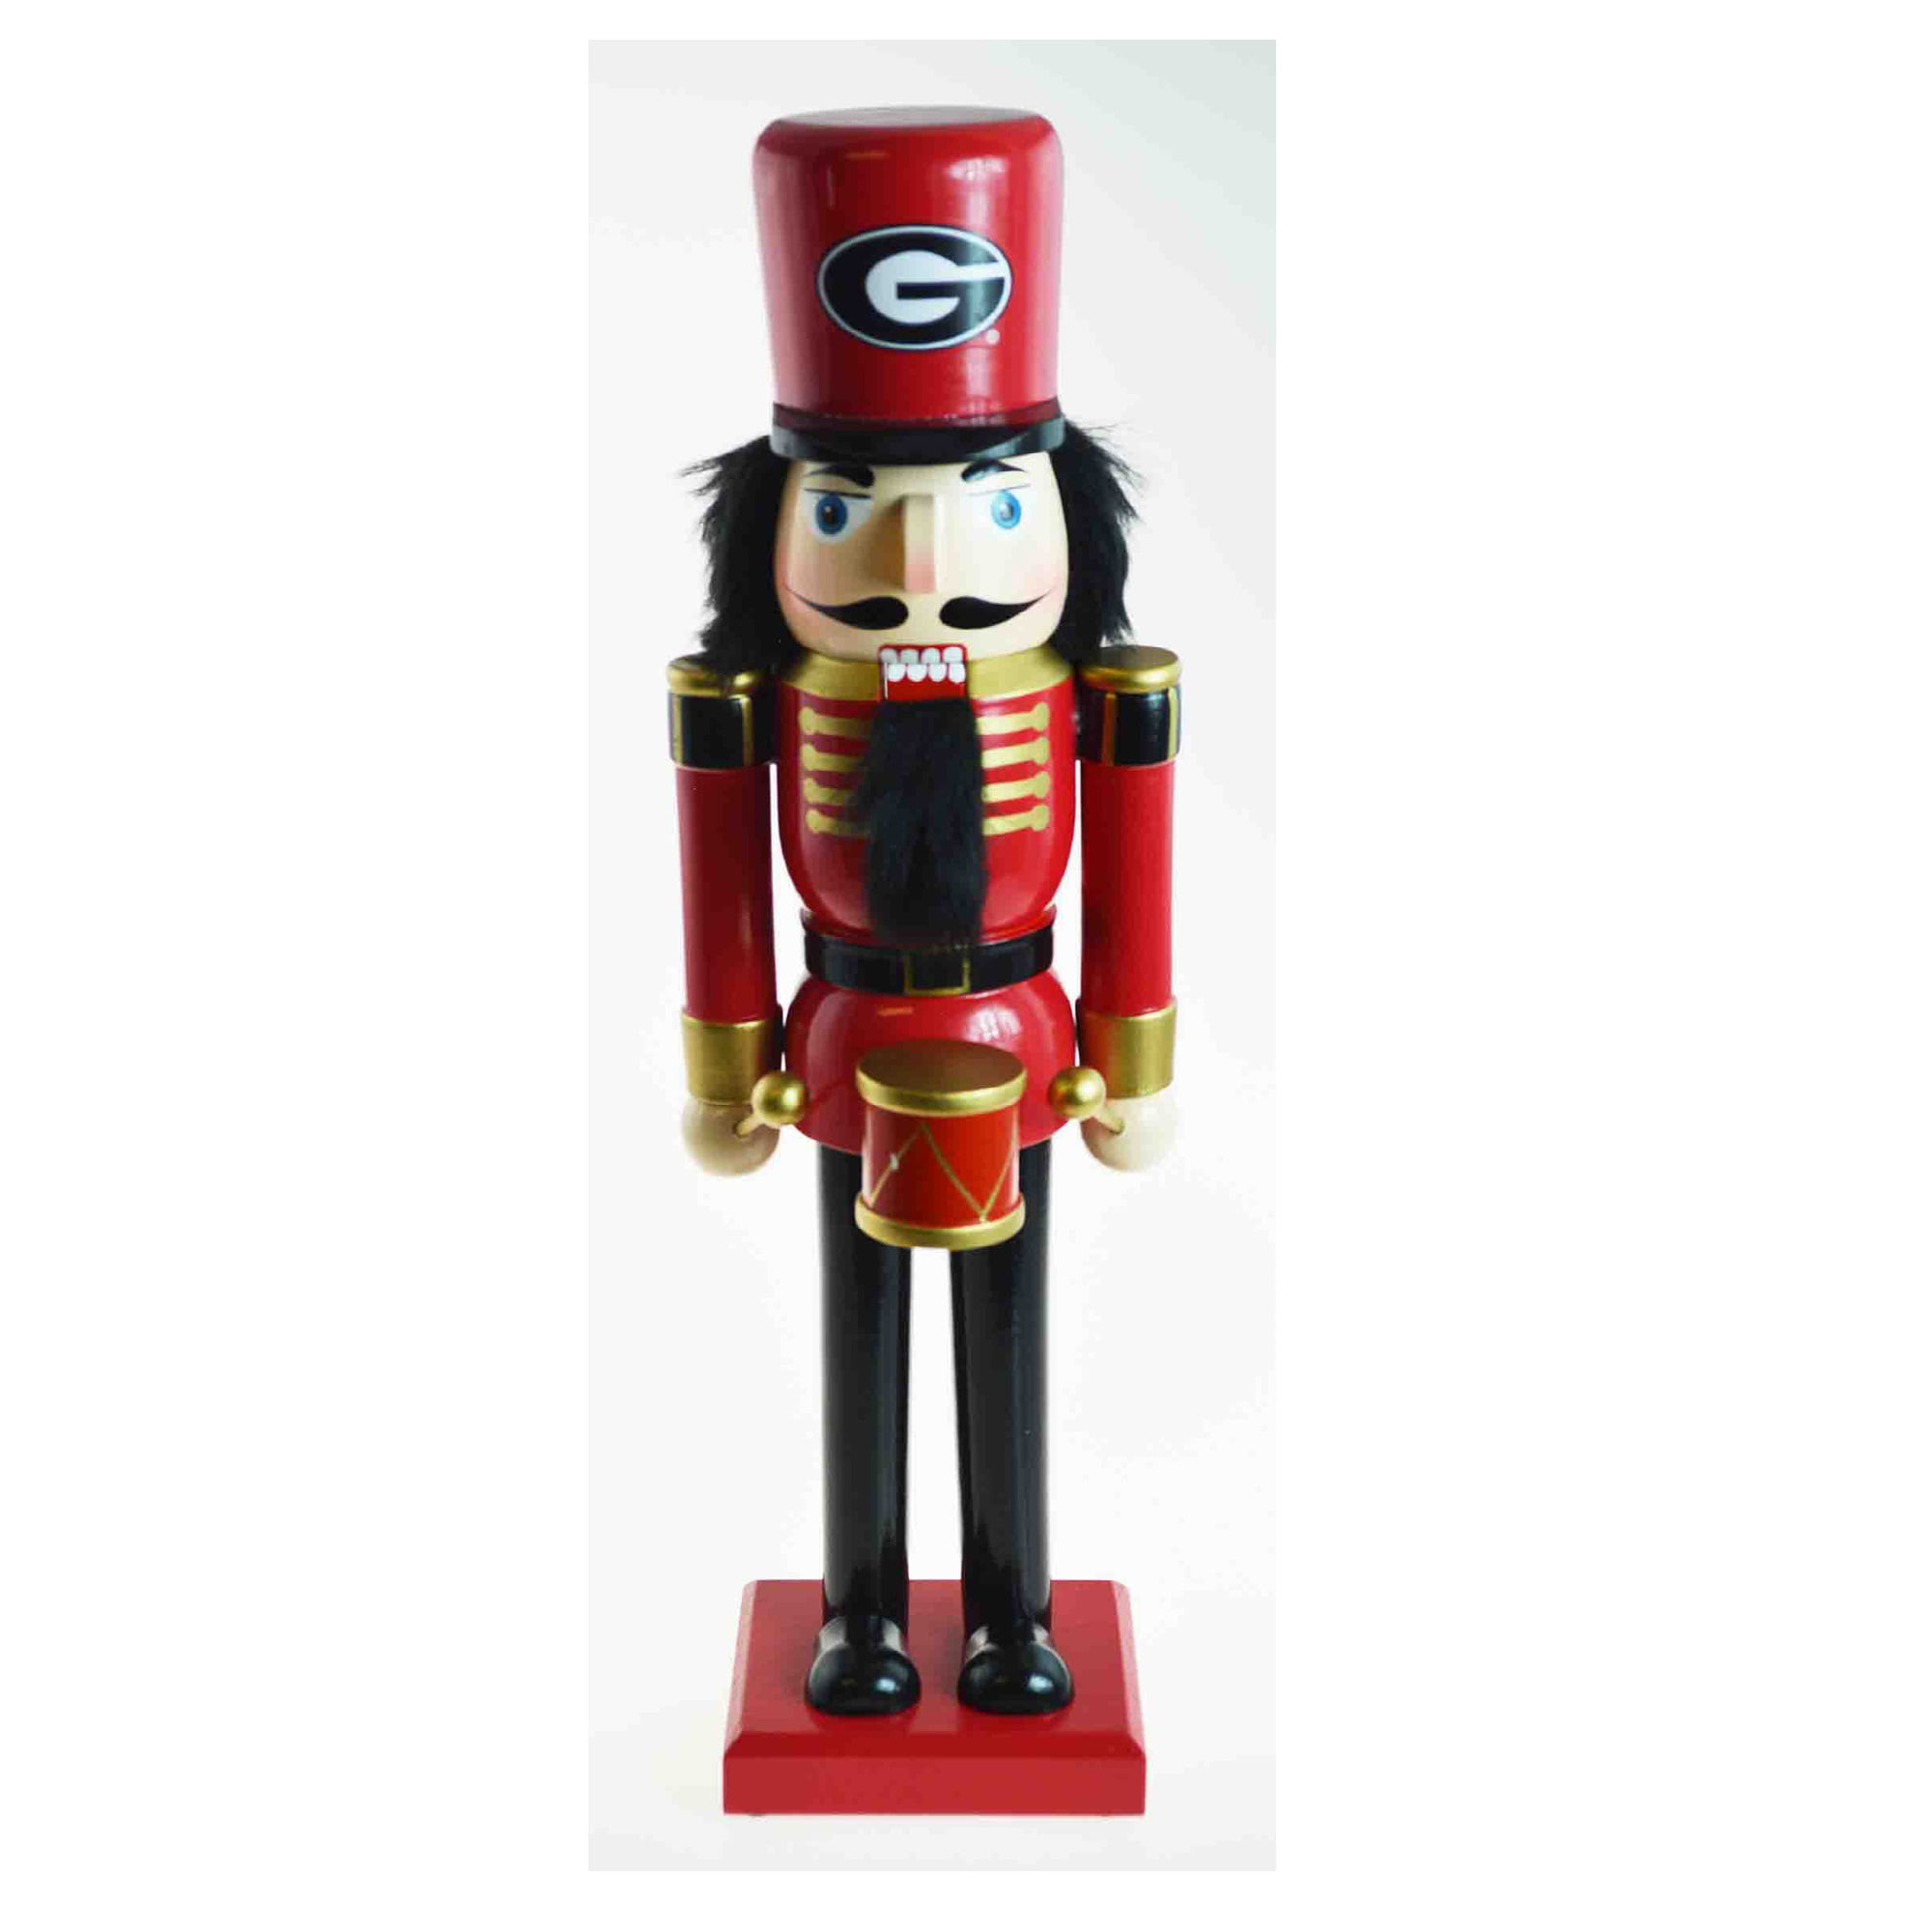 14" Free Standing Wooden Nutcracker with University of Design